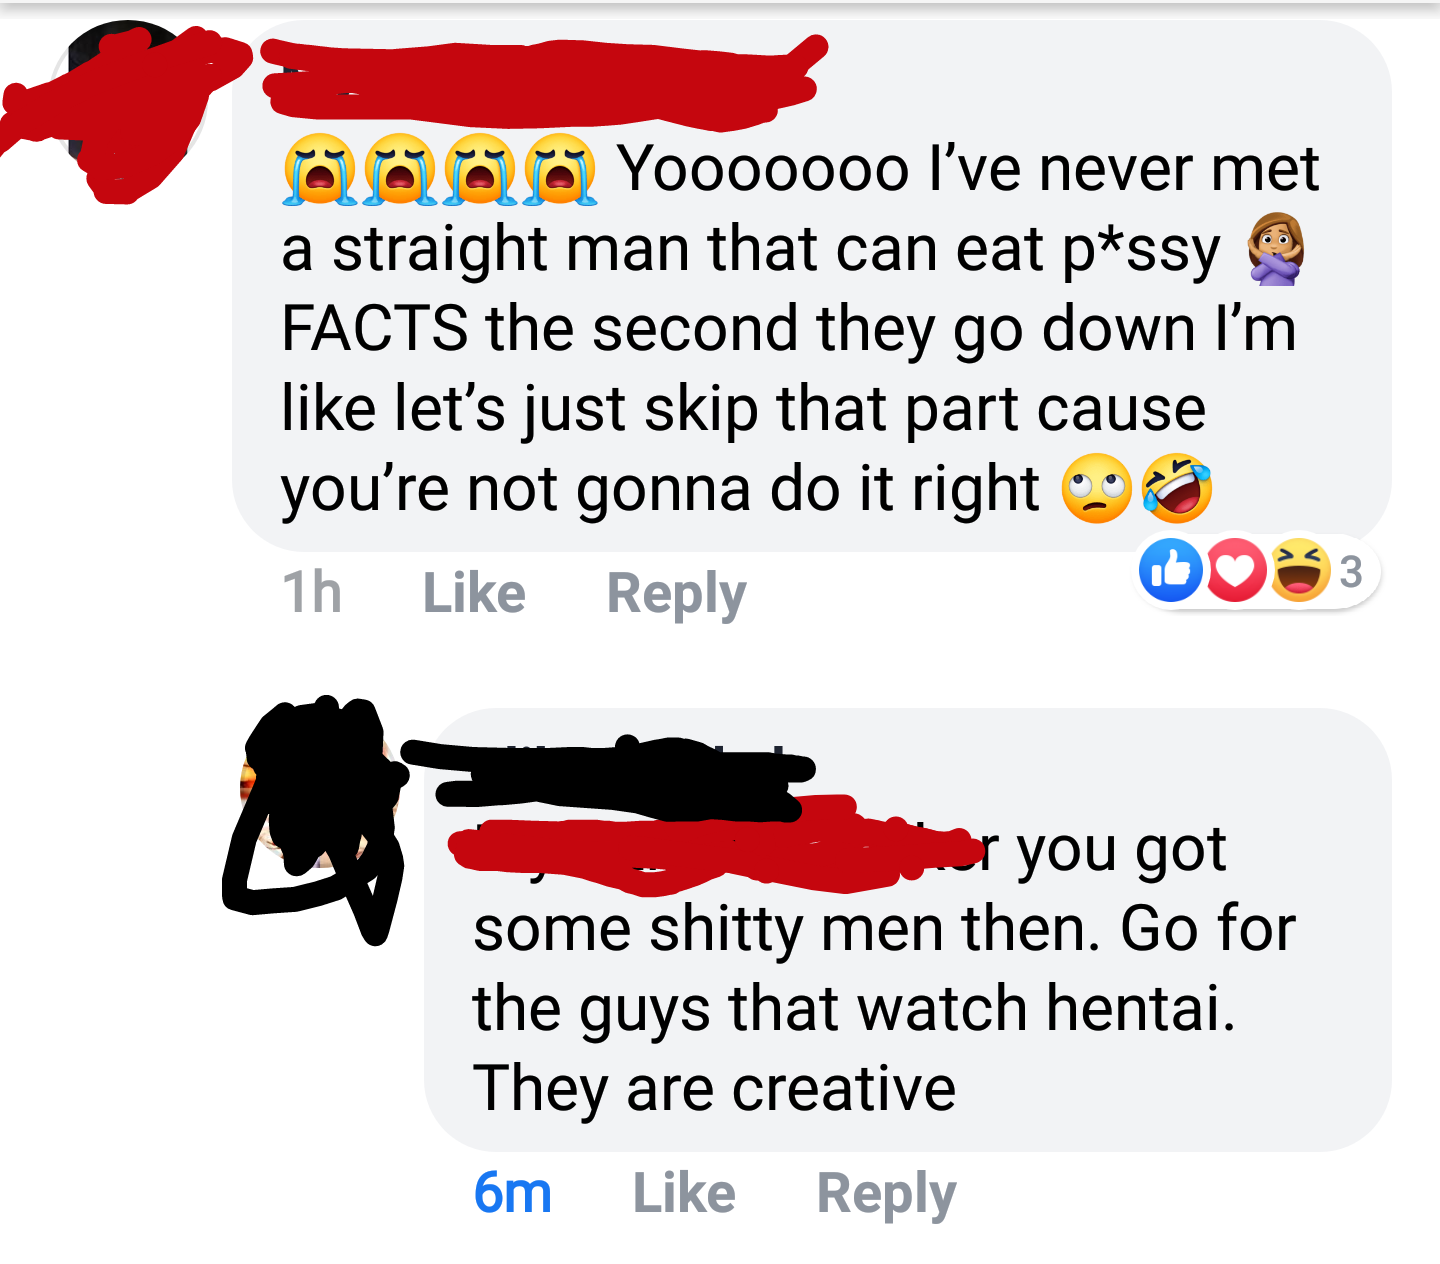 Yooooooo I've never met a straight man that can eat pssy Facts the second they go down I'm let's just skip that part cause you're not gonna do it right 9 1h D33 or you got some shitty men then. Go for the guys that watch hentai. They are creative om